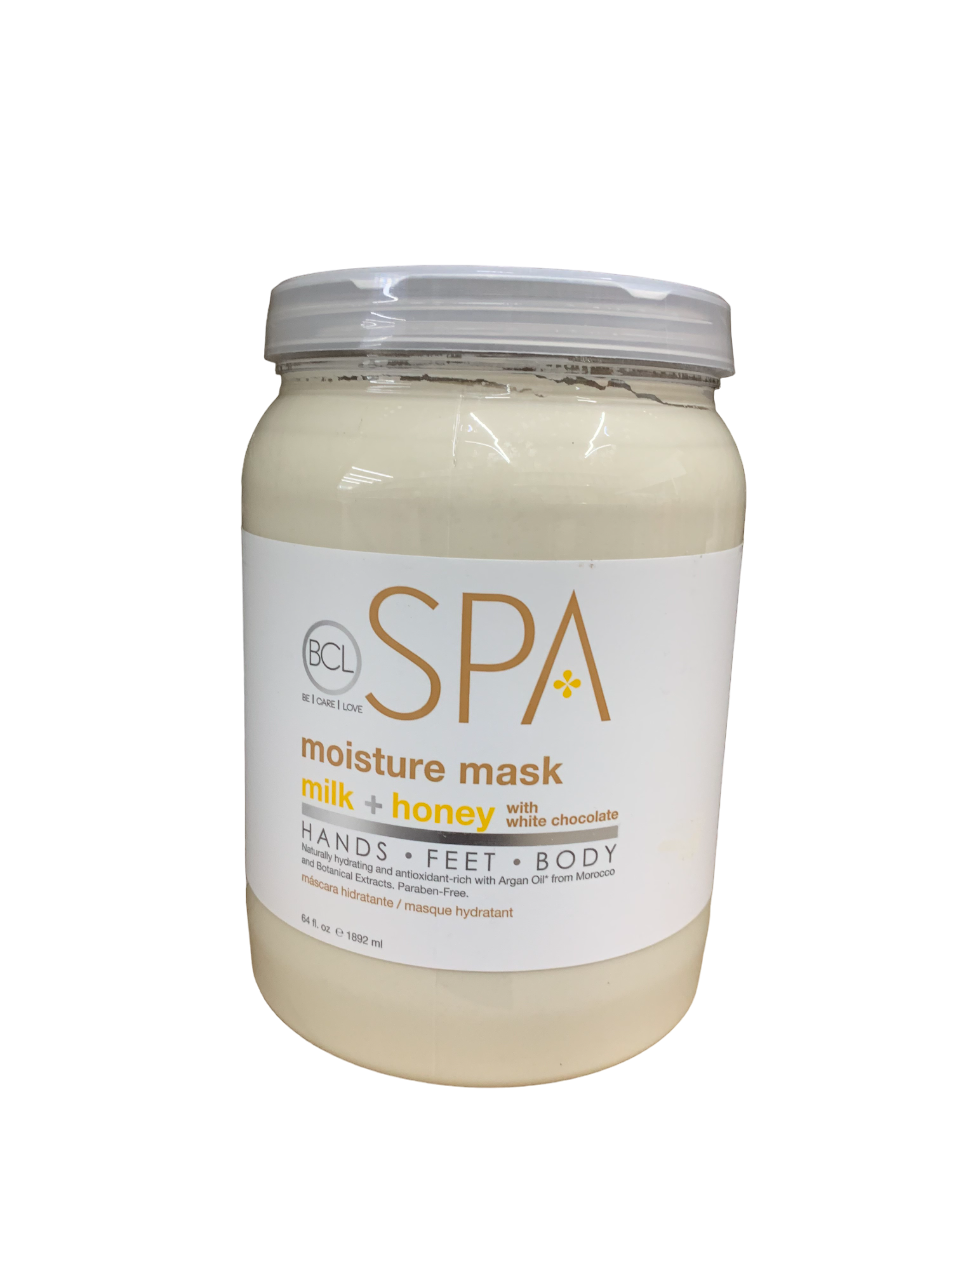 BCL Spa Moisture Mask Milk Honey with White Chocolate